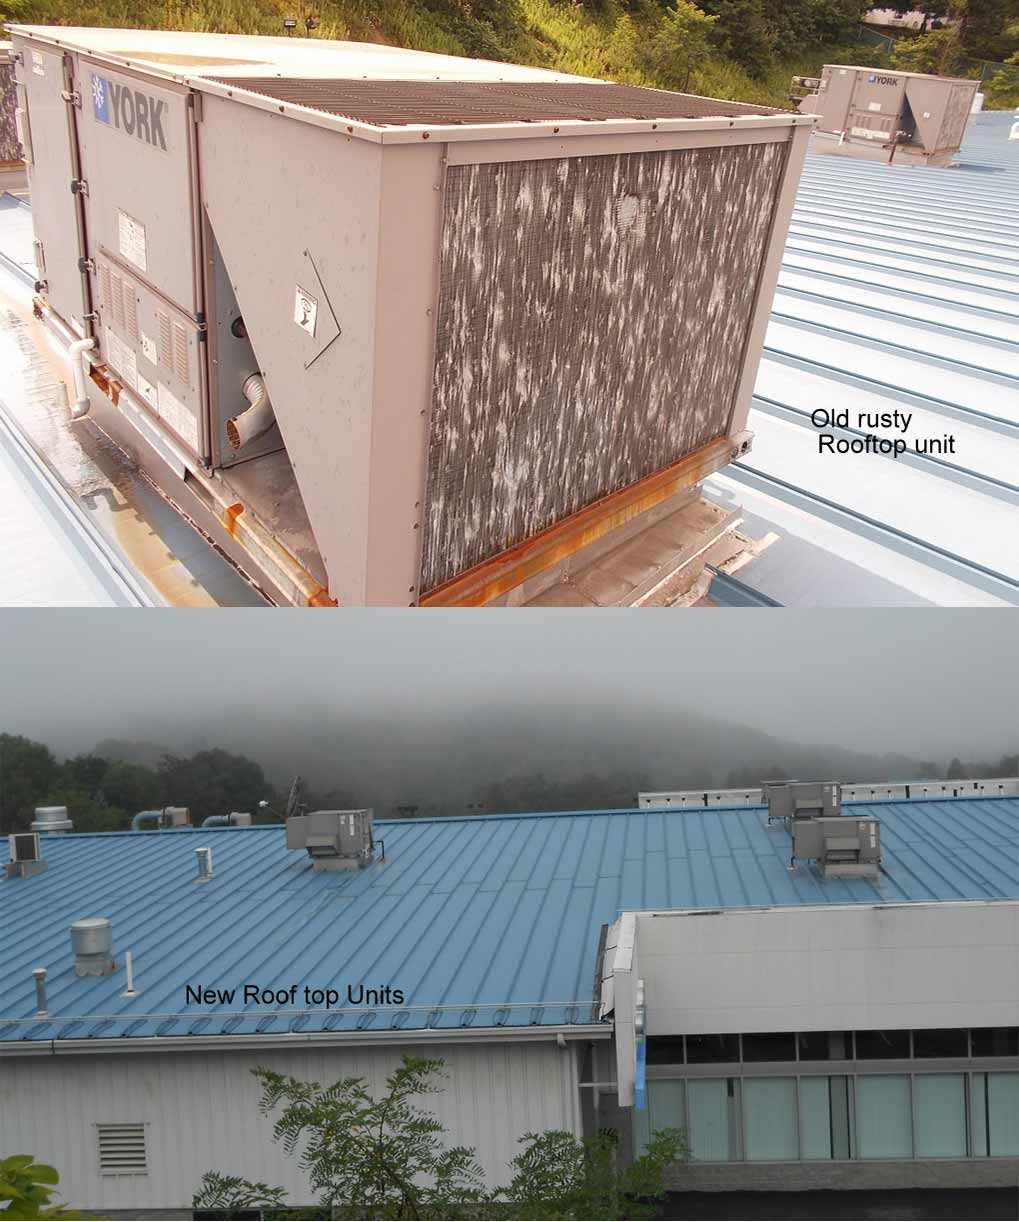 Commercial HVAC services by Skone's Advanced Heating & Cooling